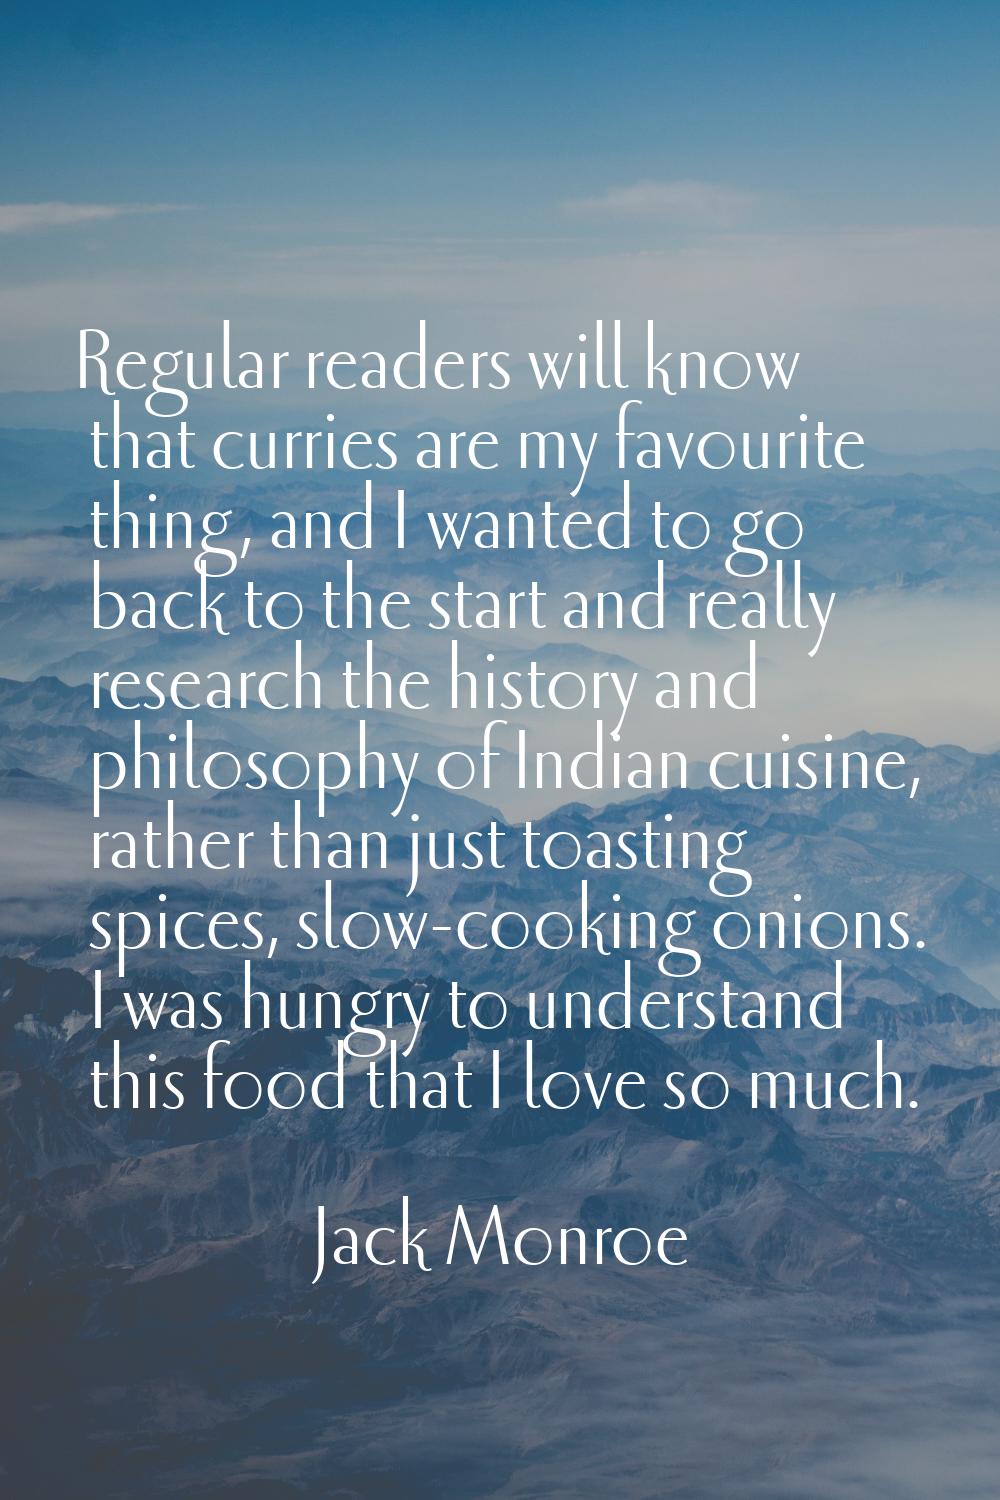 Regular readers will know that curries are my favourite thing, and I wanted to go back to the start